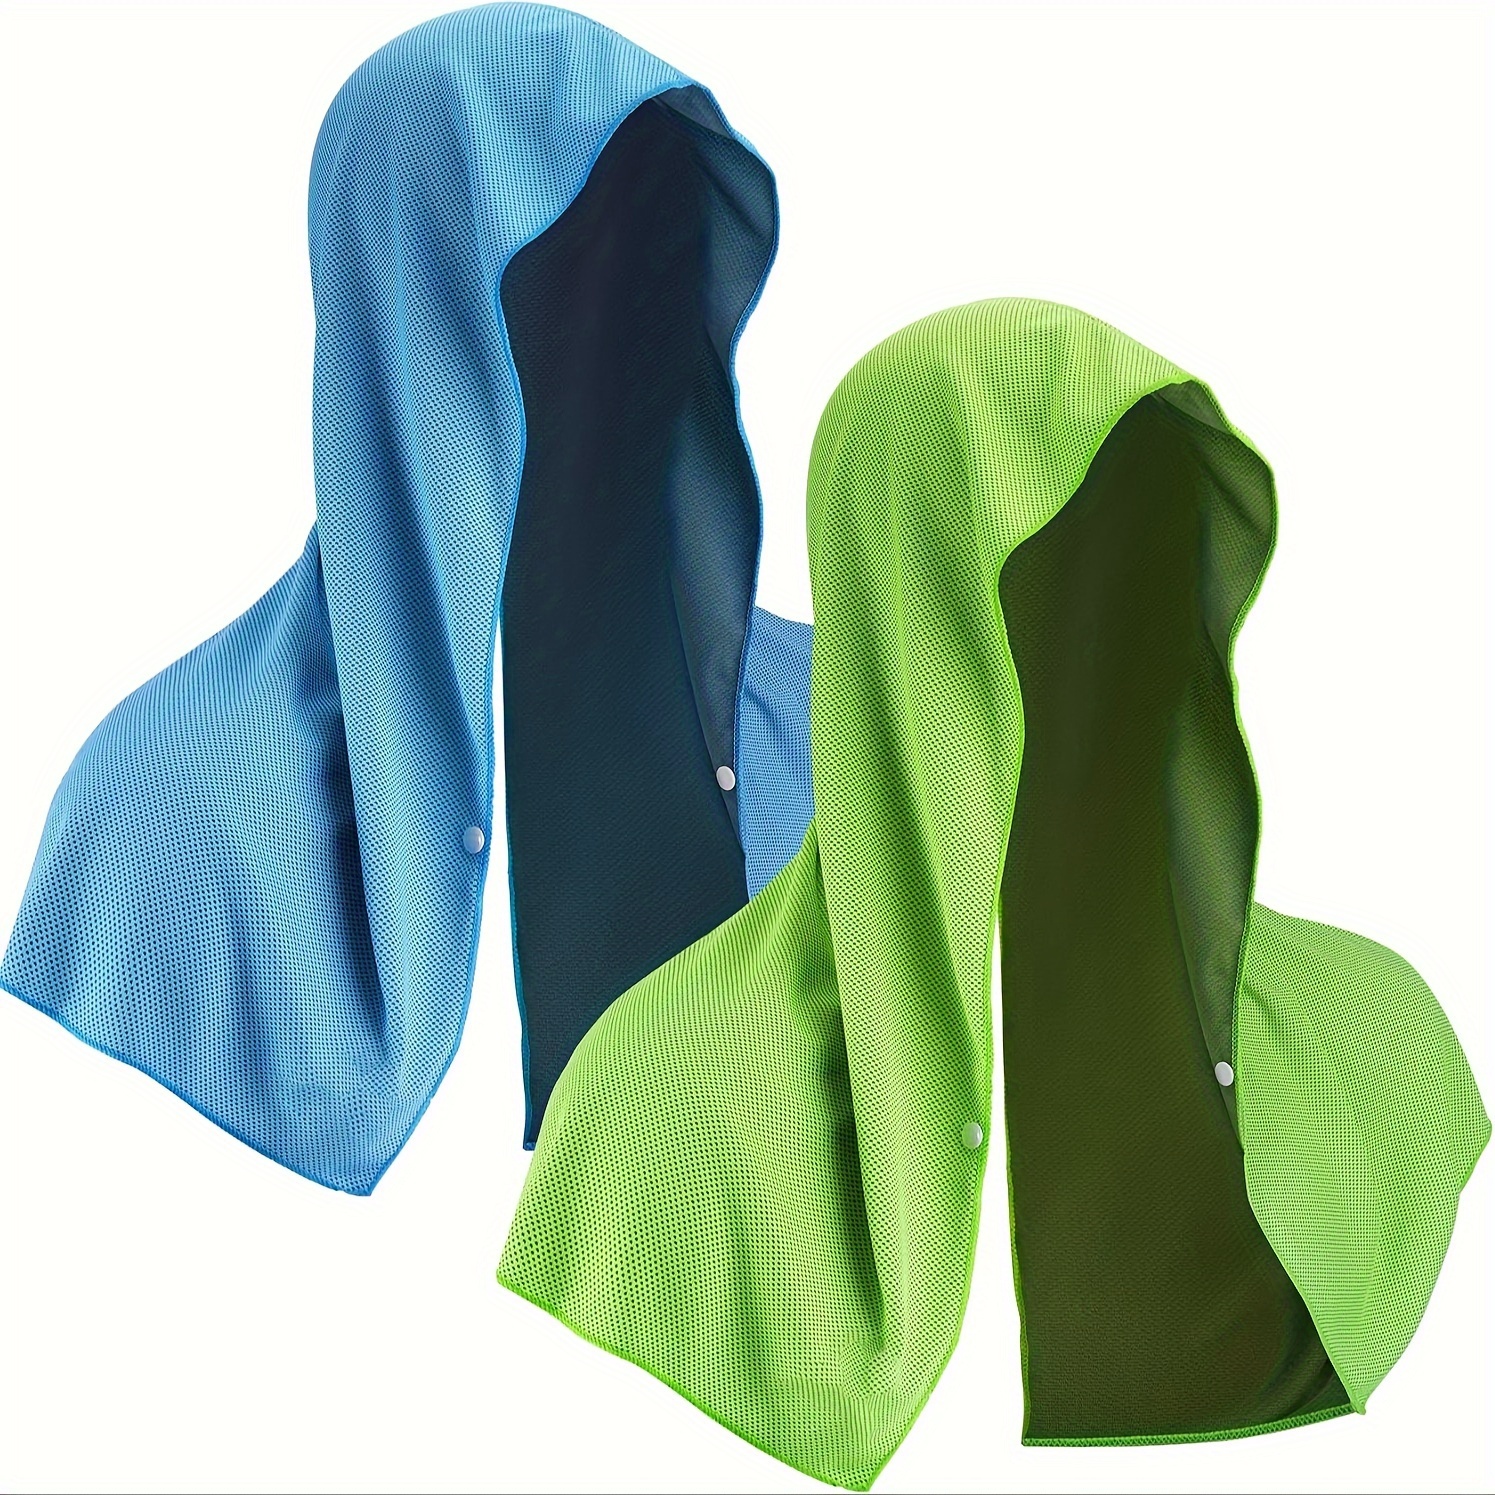 1pc Cooling Hoodie Towel Absorbent Quick Drying Cooling Towels For Neck And  Face Sunscreen Cooling Neck Wraps, Don't Miss These Great Deals